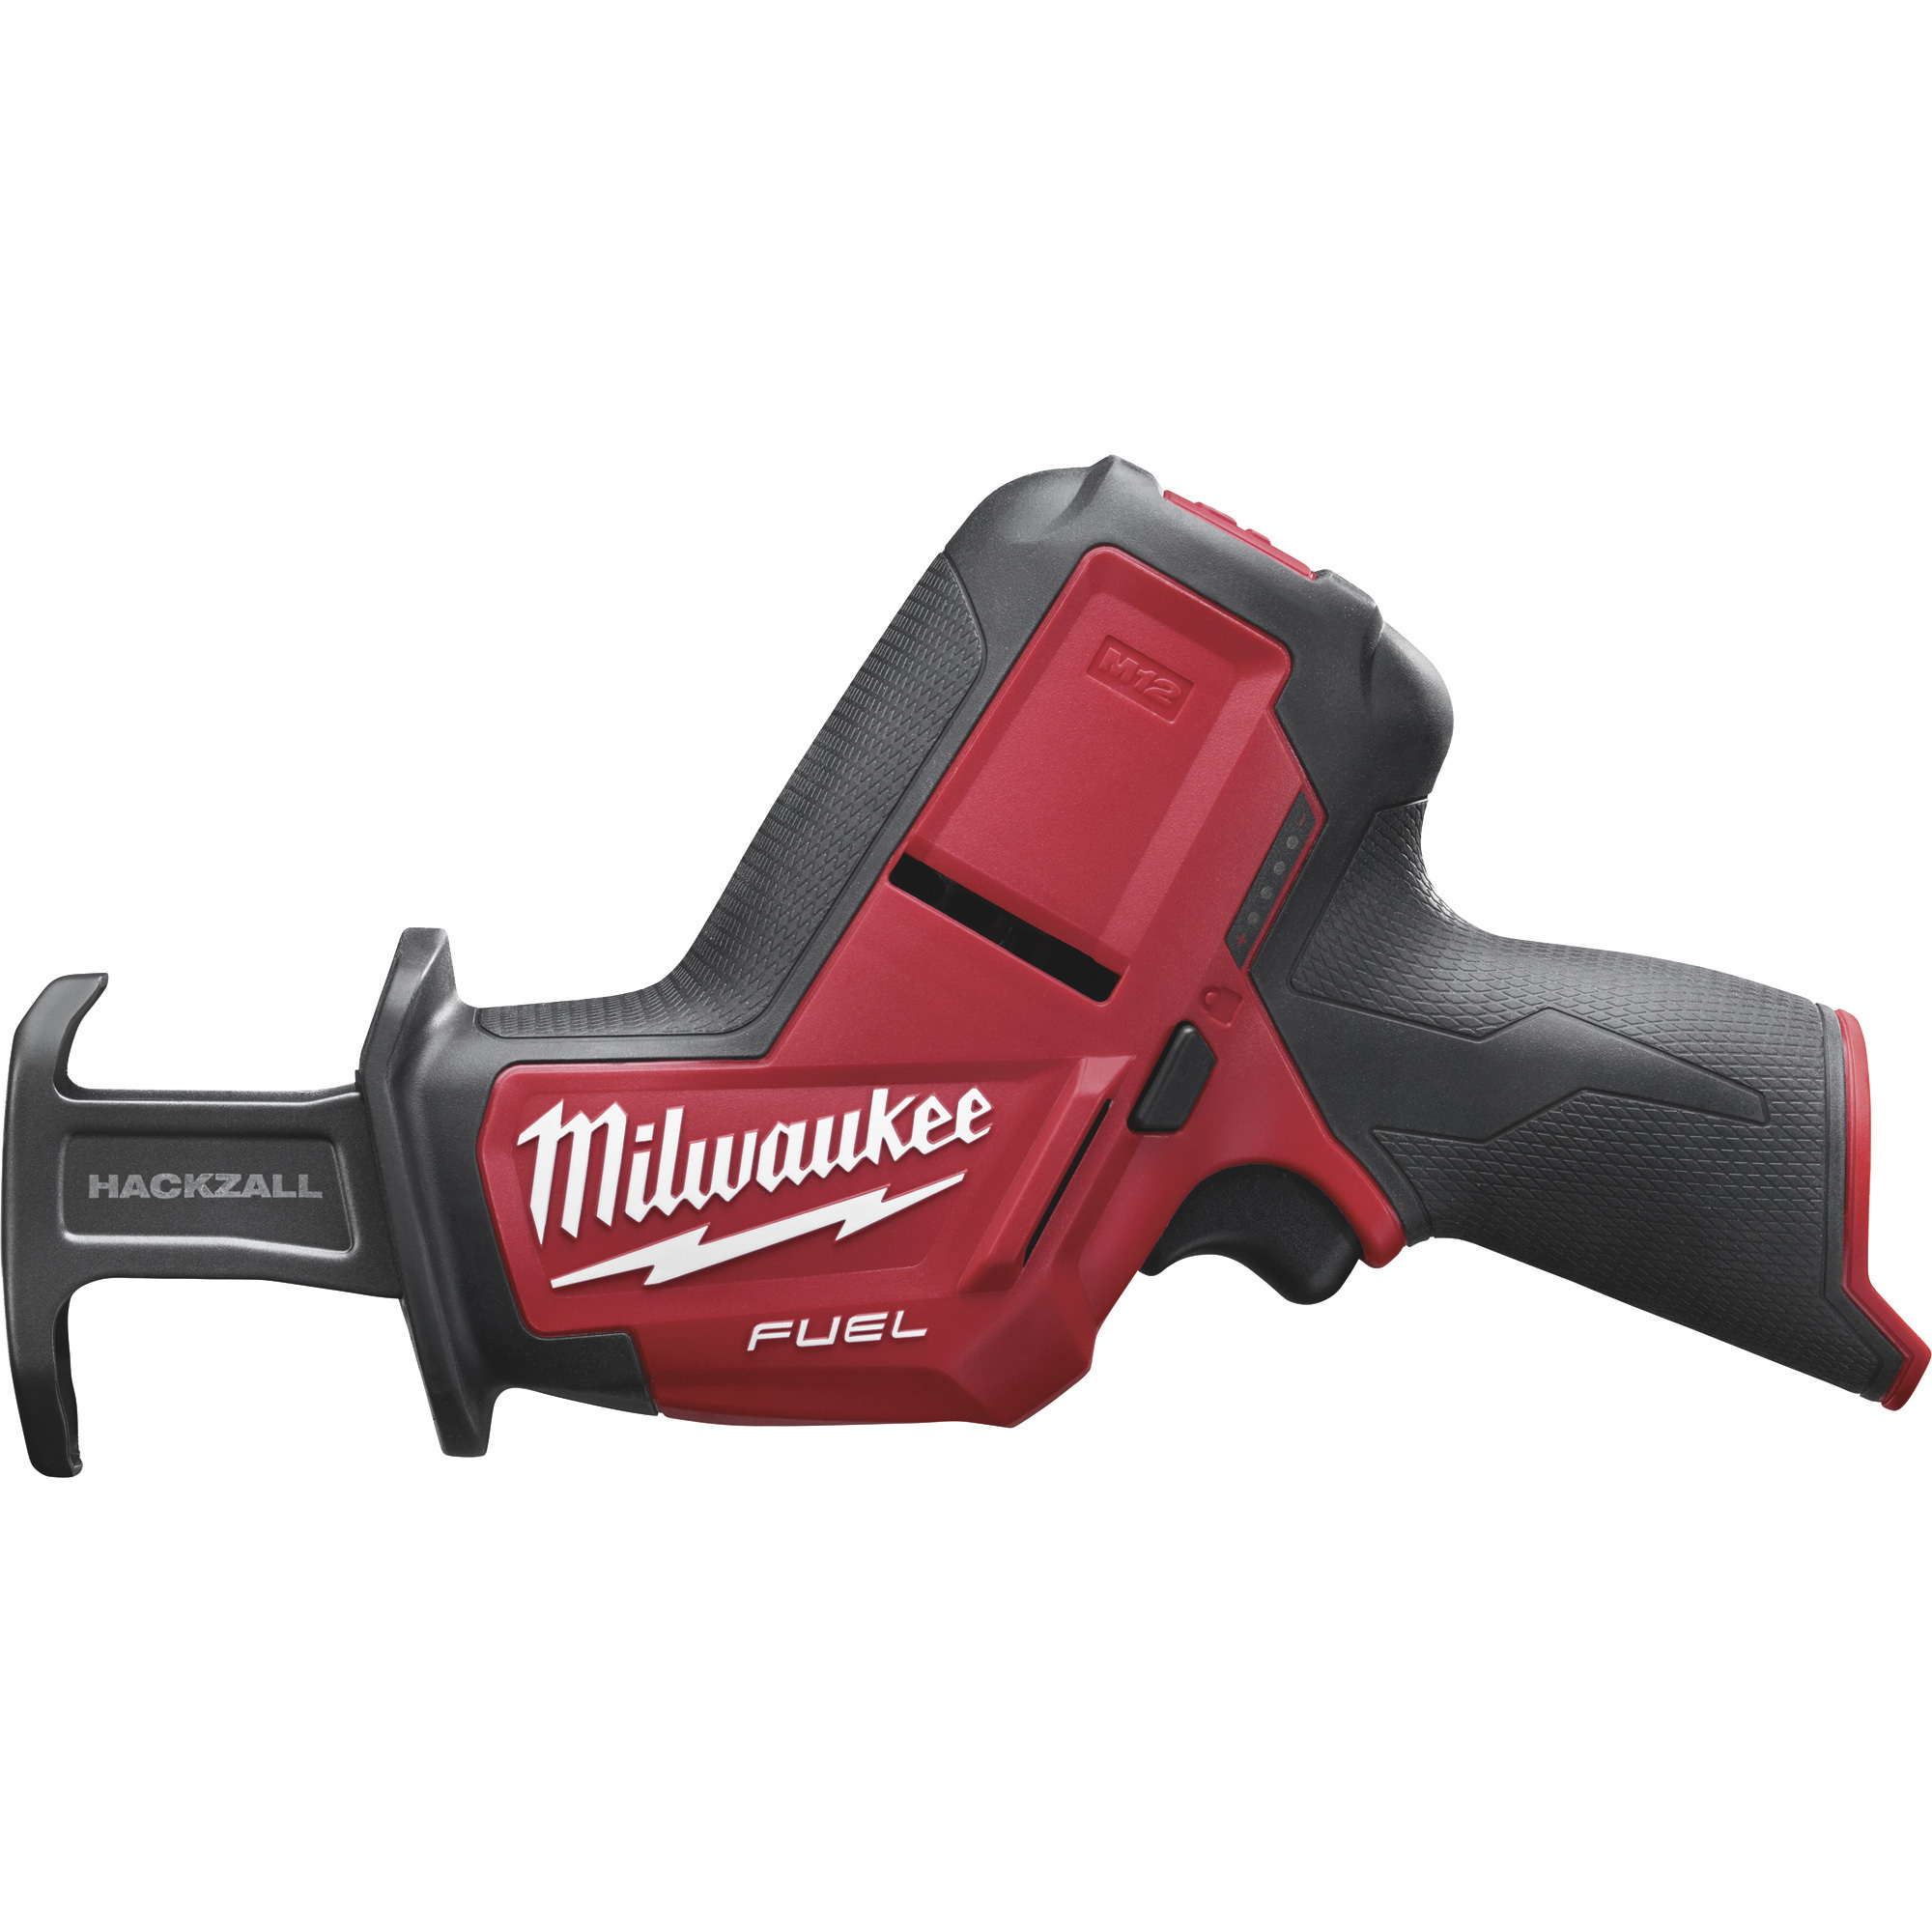 Milwaukee M12 FUEL Hackzall Reciprocating Saw, Tool Only, Model 2520-20A